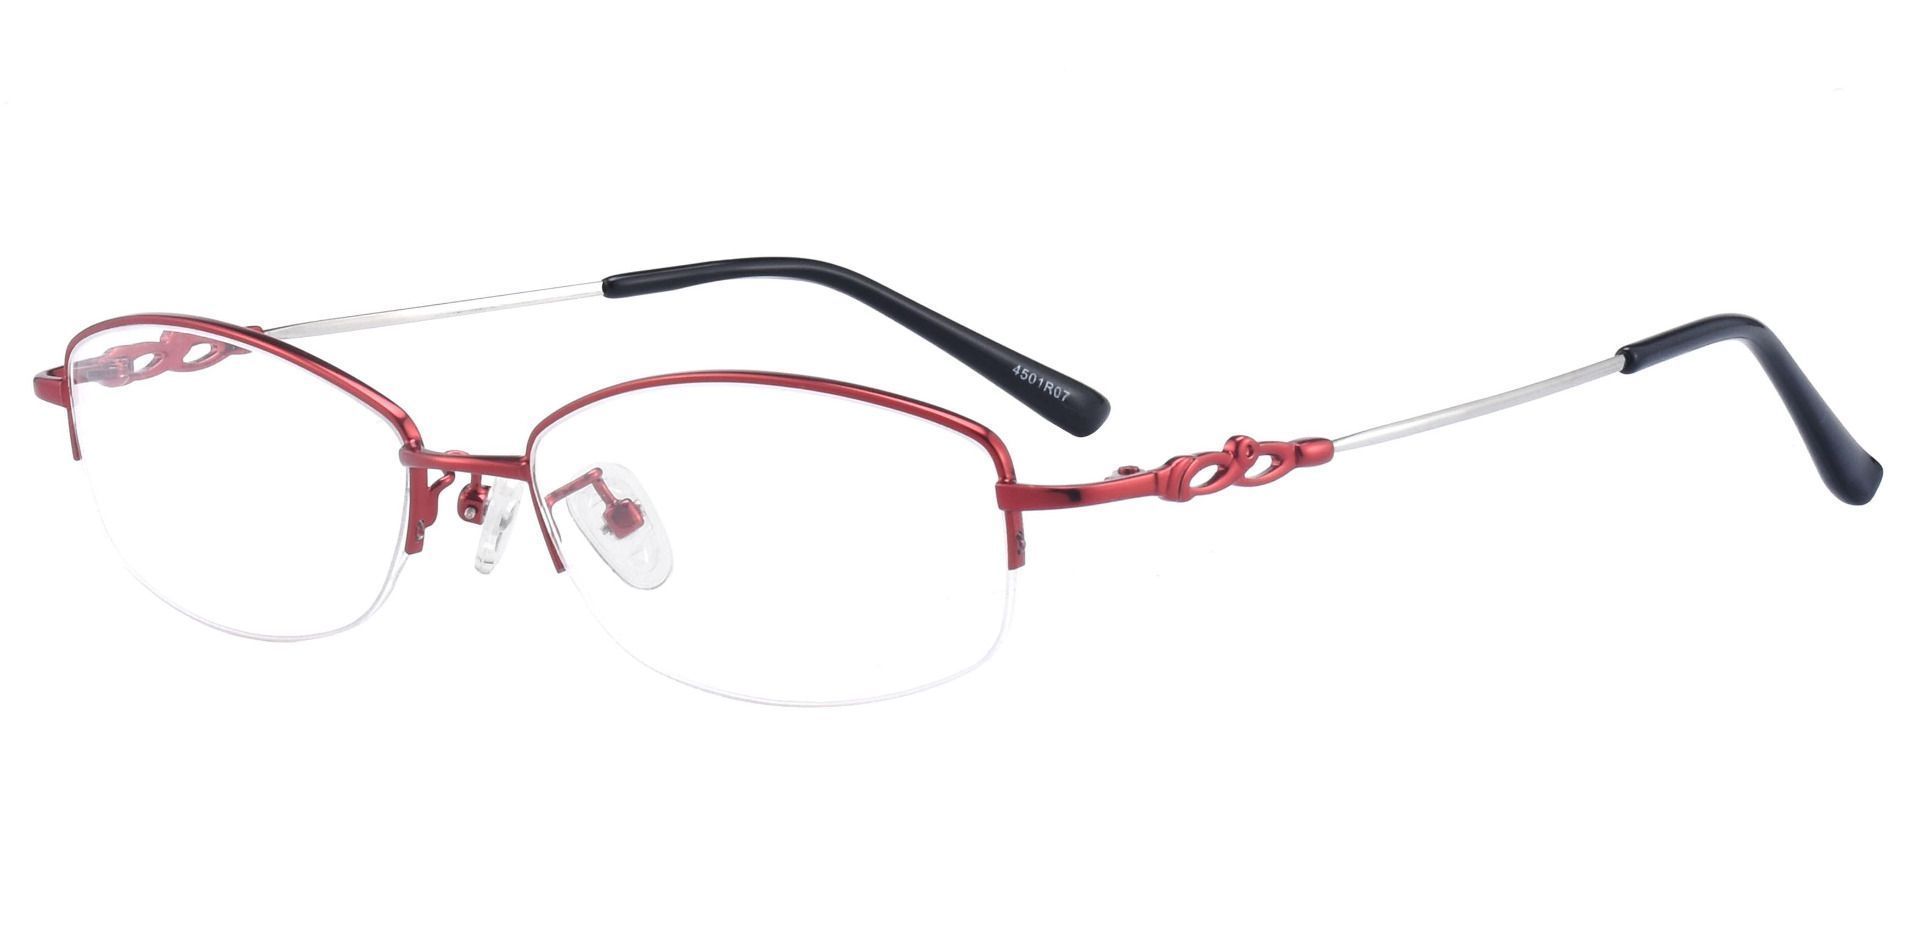 Meadowsweet Oval Lined Bifocal Glasses - Red